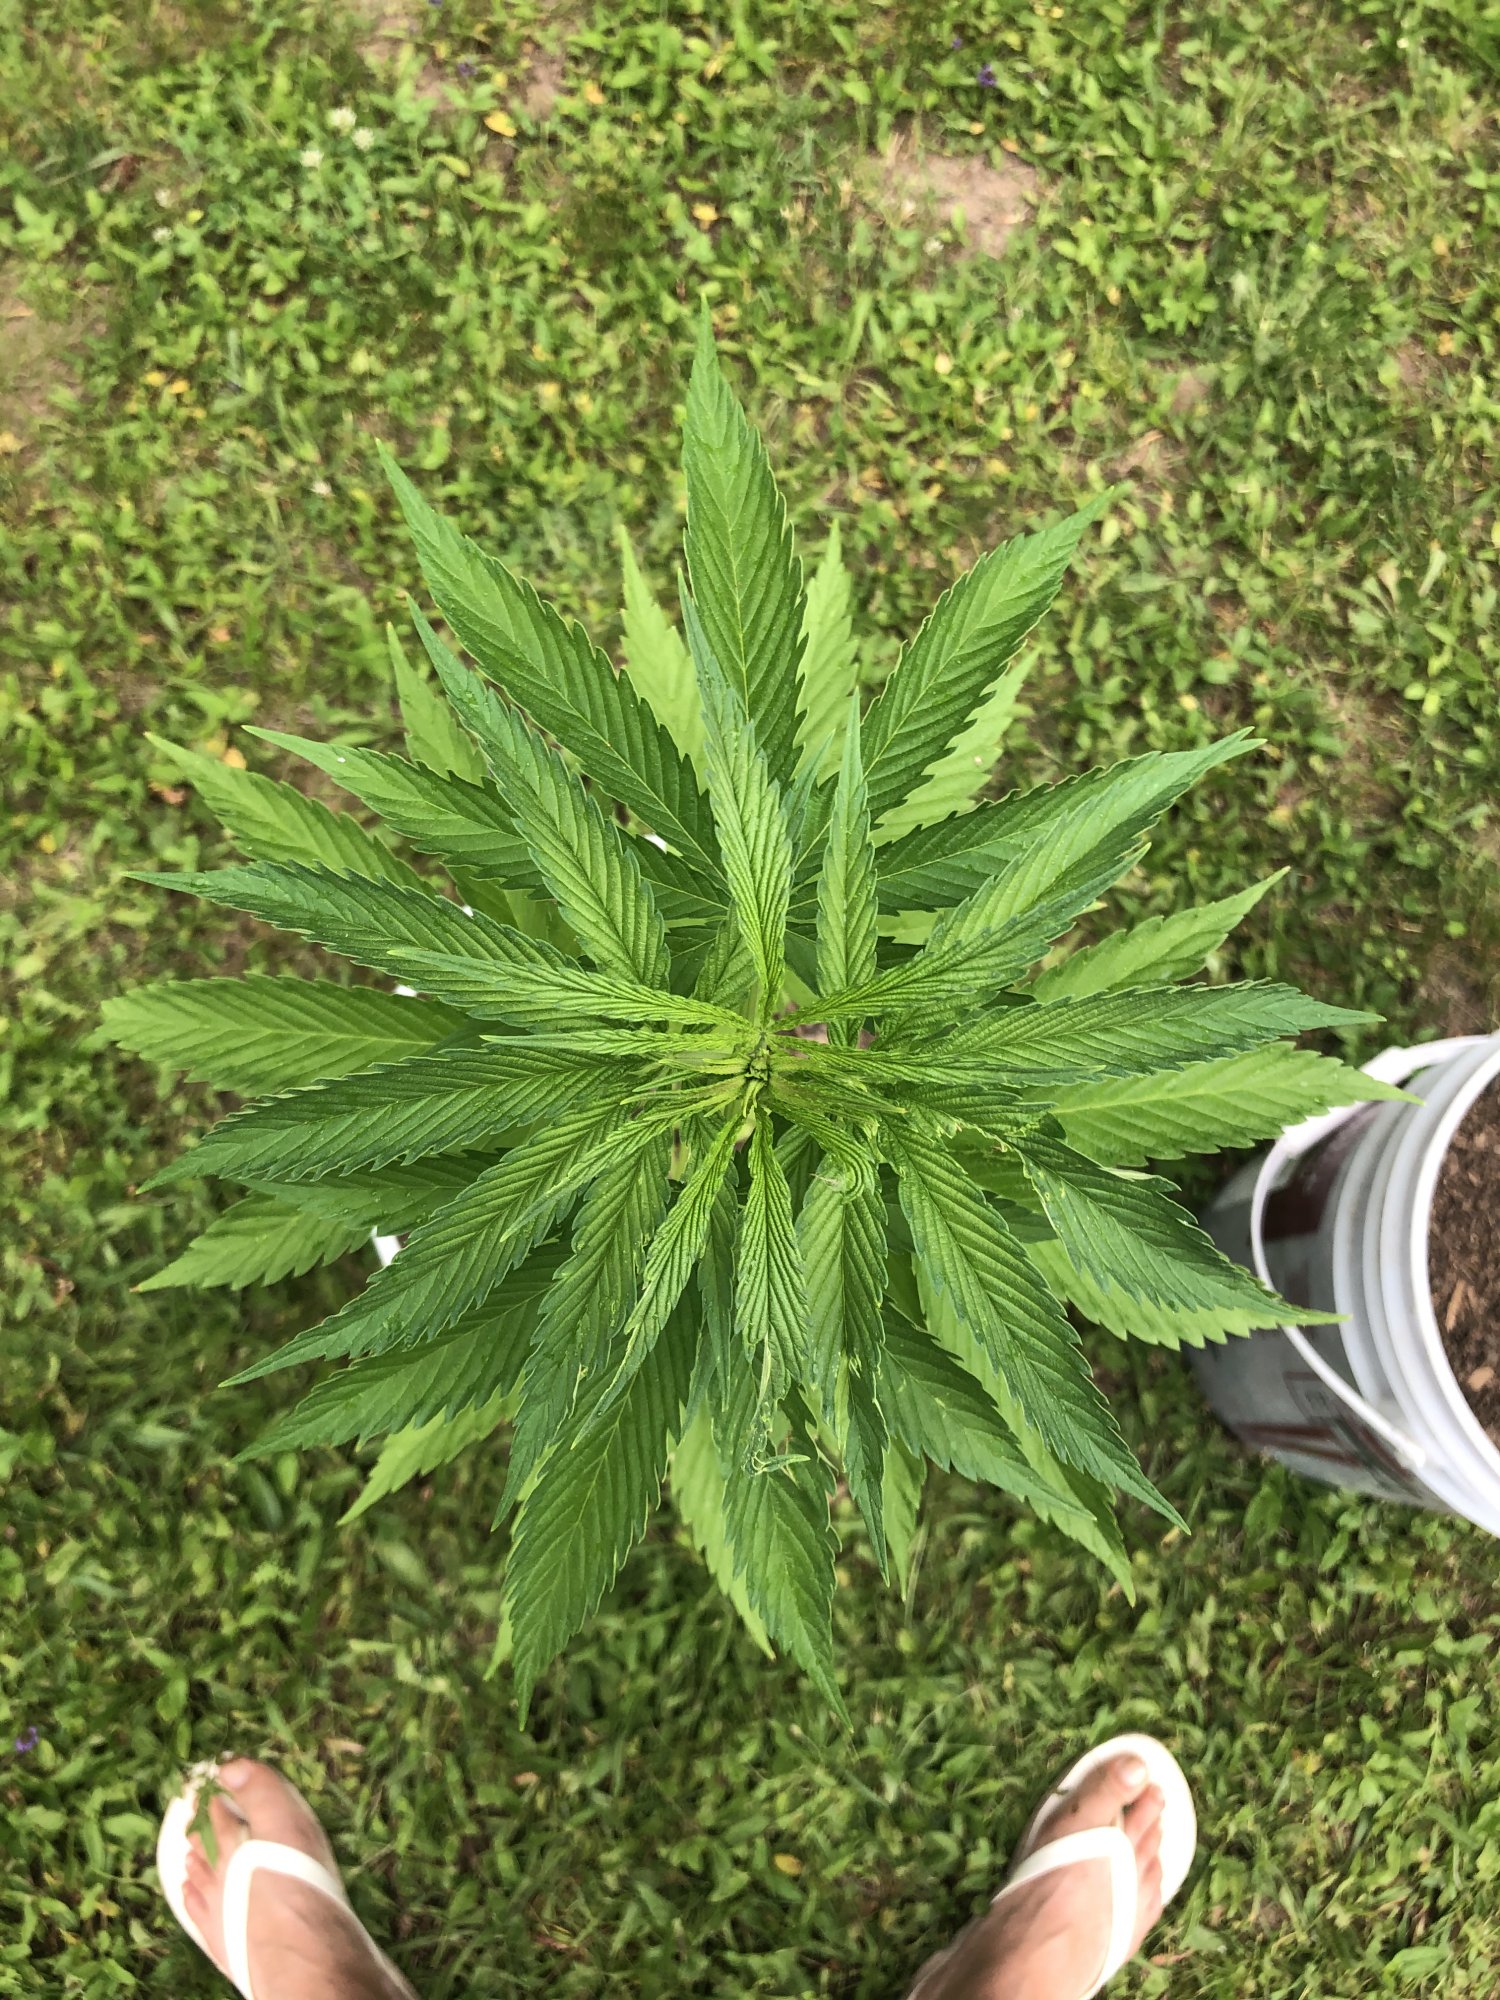 First time grower  help diagnosing please 16